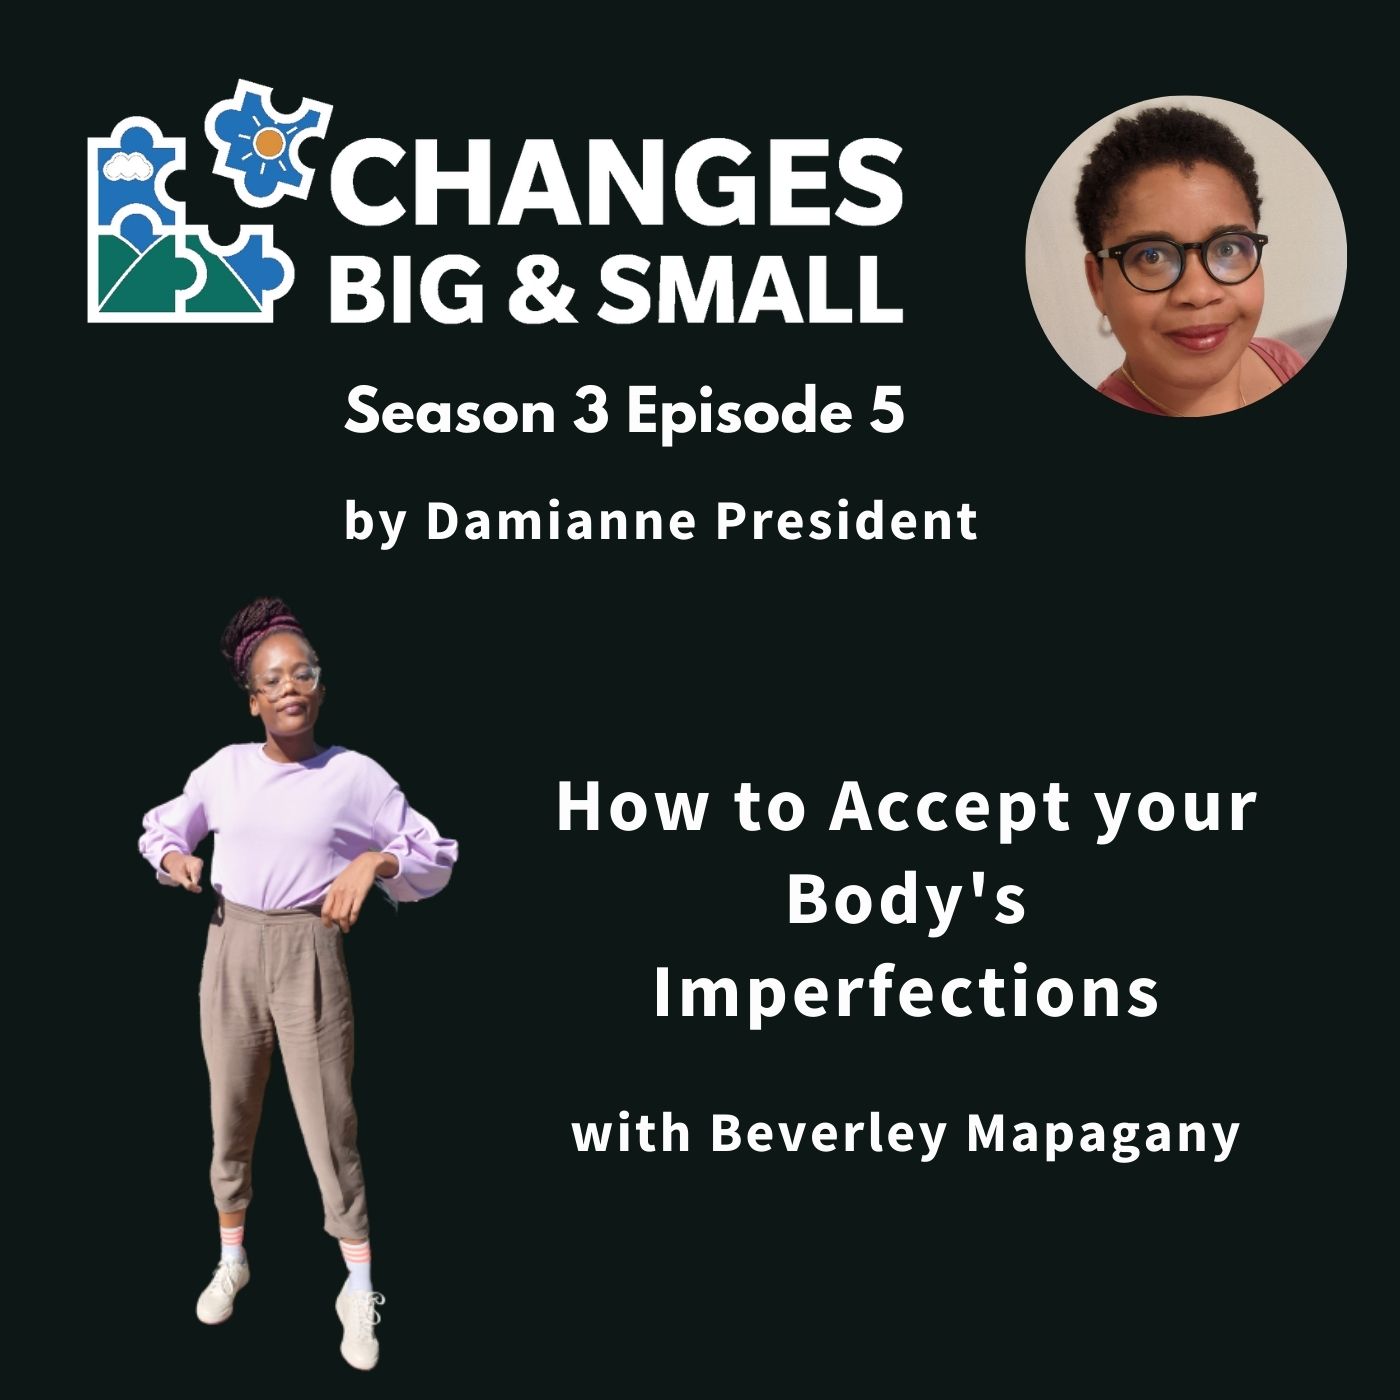 How to Accept Your Body’s Imperfections